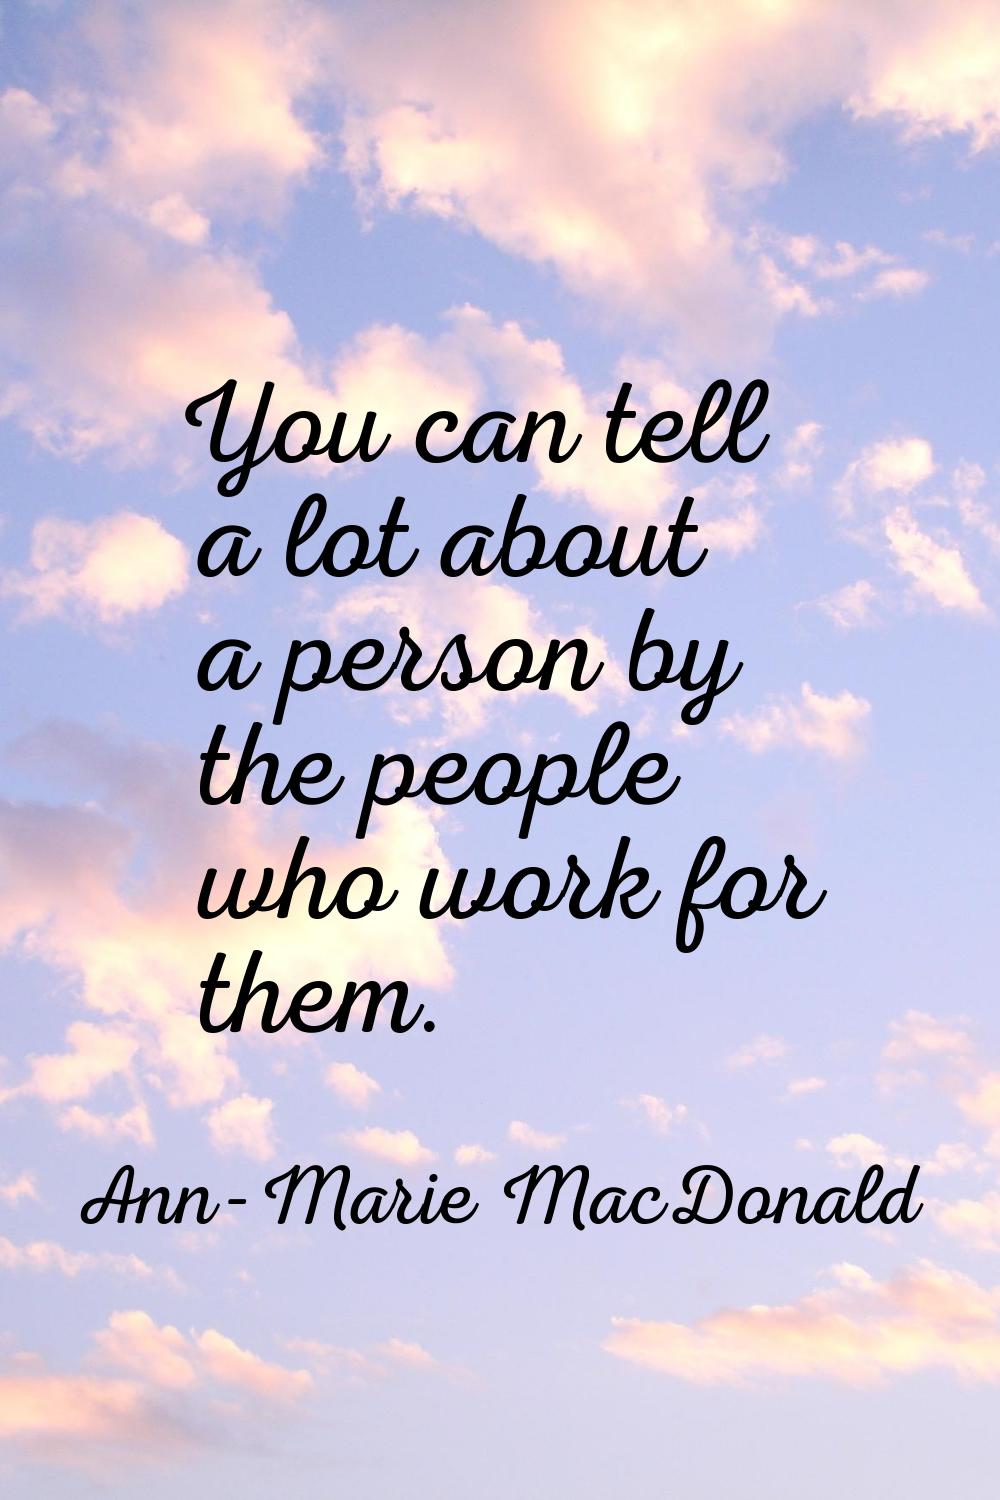 You can tell a lot about a person by the people who work for them.